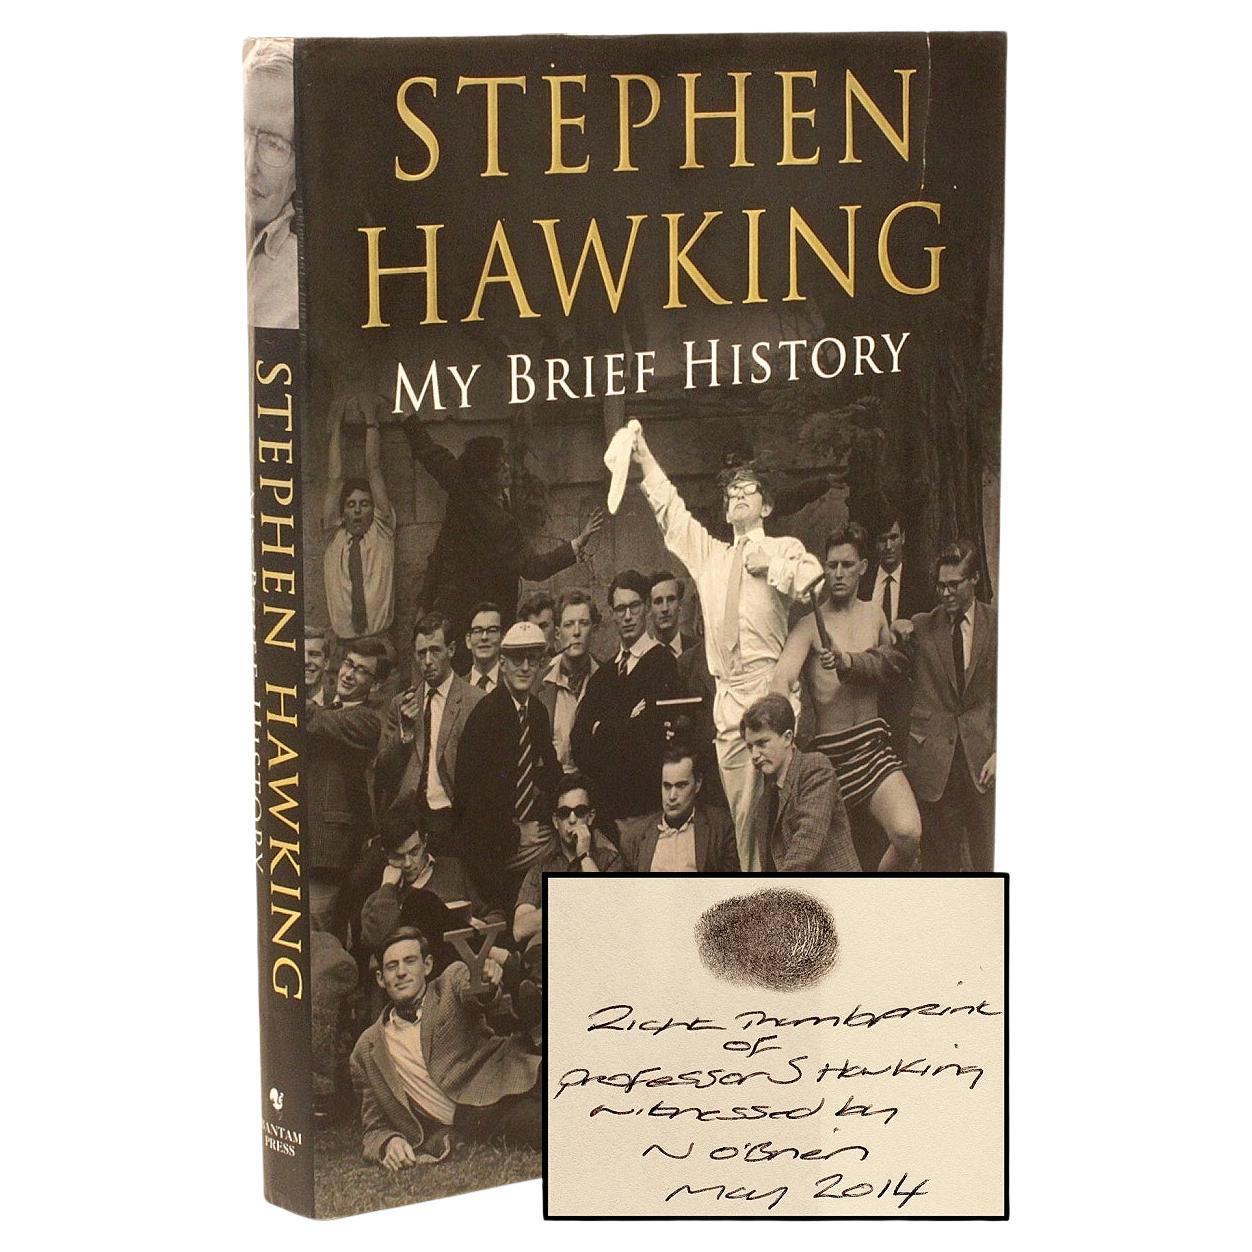 Stephen Hawking, My Brief History, 1st Ed Signed with Thumb Print of Hawking For Sale